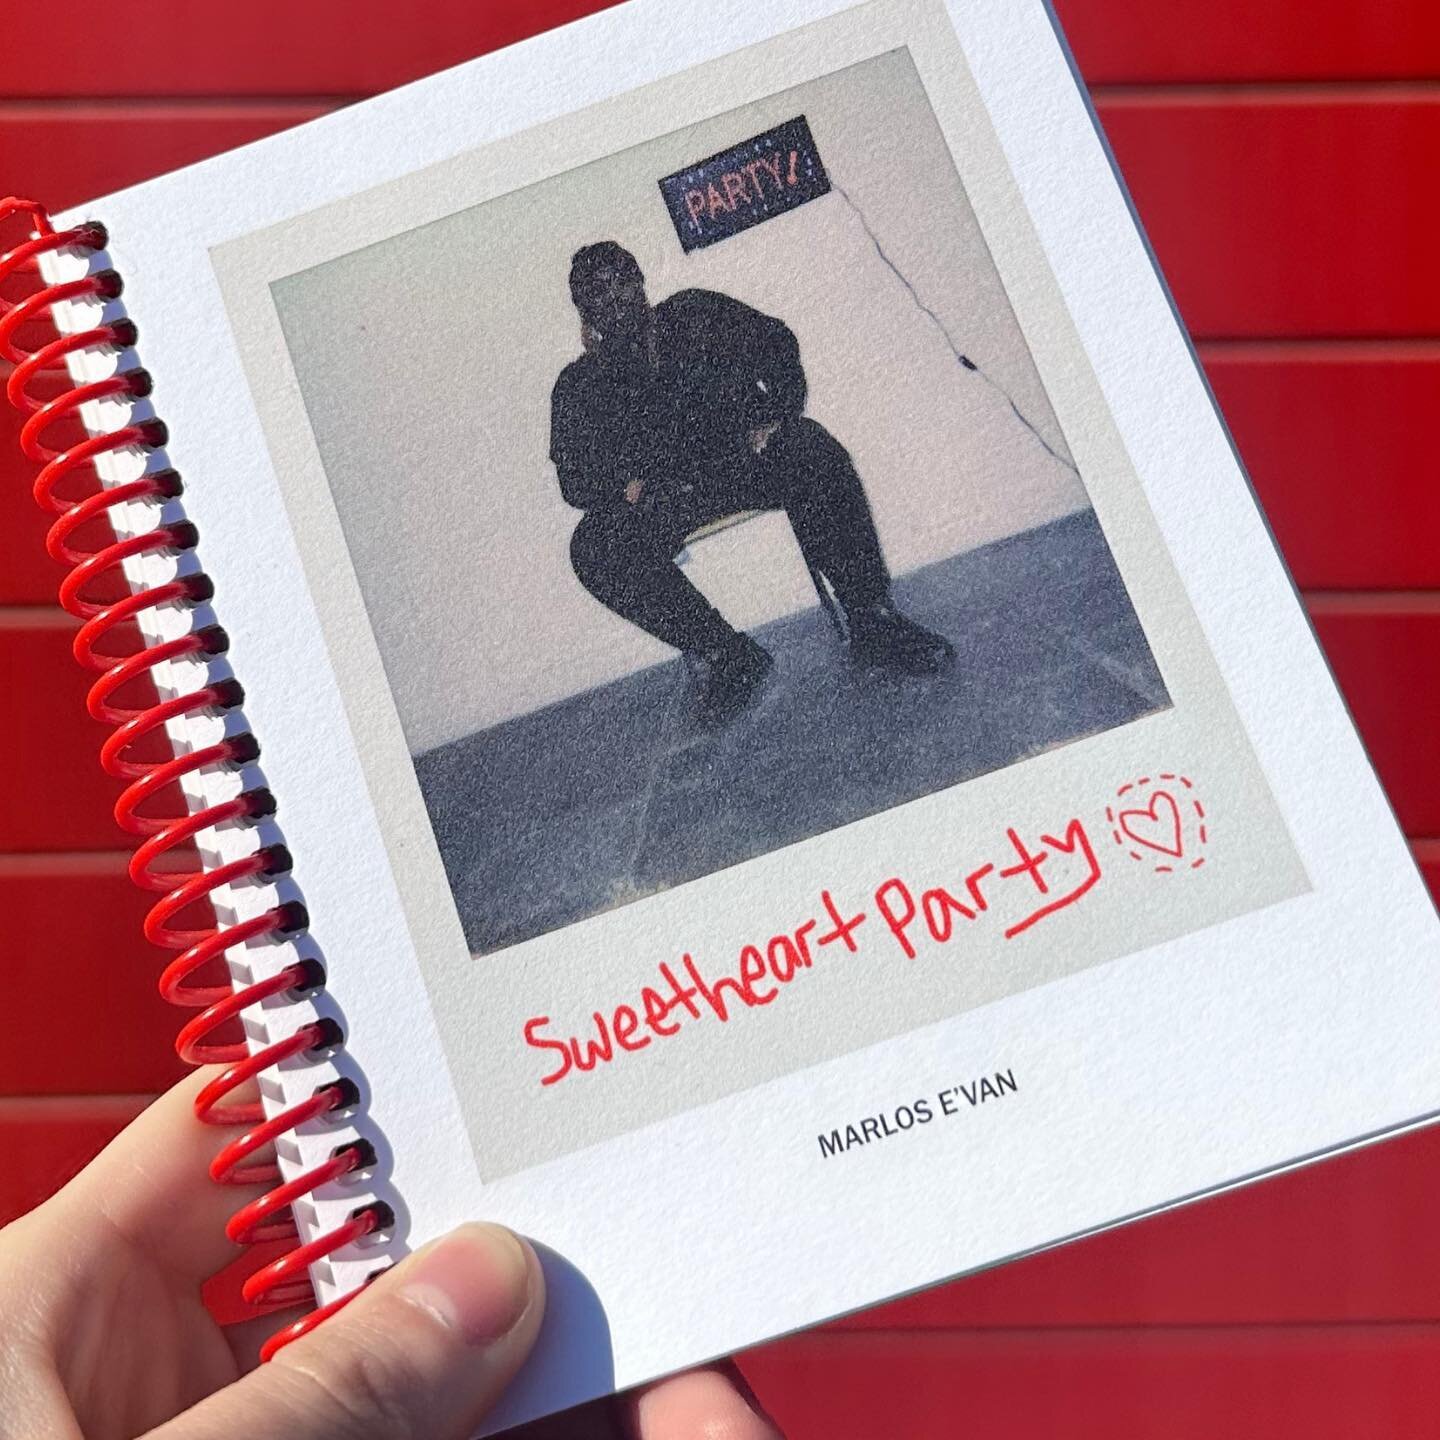 Artist @marlosevan&rsquo;s SWEETHEART PARTY is a super, limited edition collection of photographs. Looking for something special for the holidays. This is it!

&ldquo;Third Man gifted Marlos a Third Man Photo Studio x Retrospekt Polaroid camera to wh